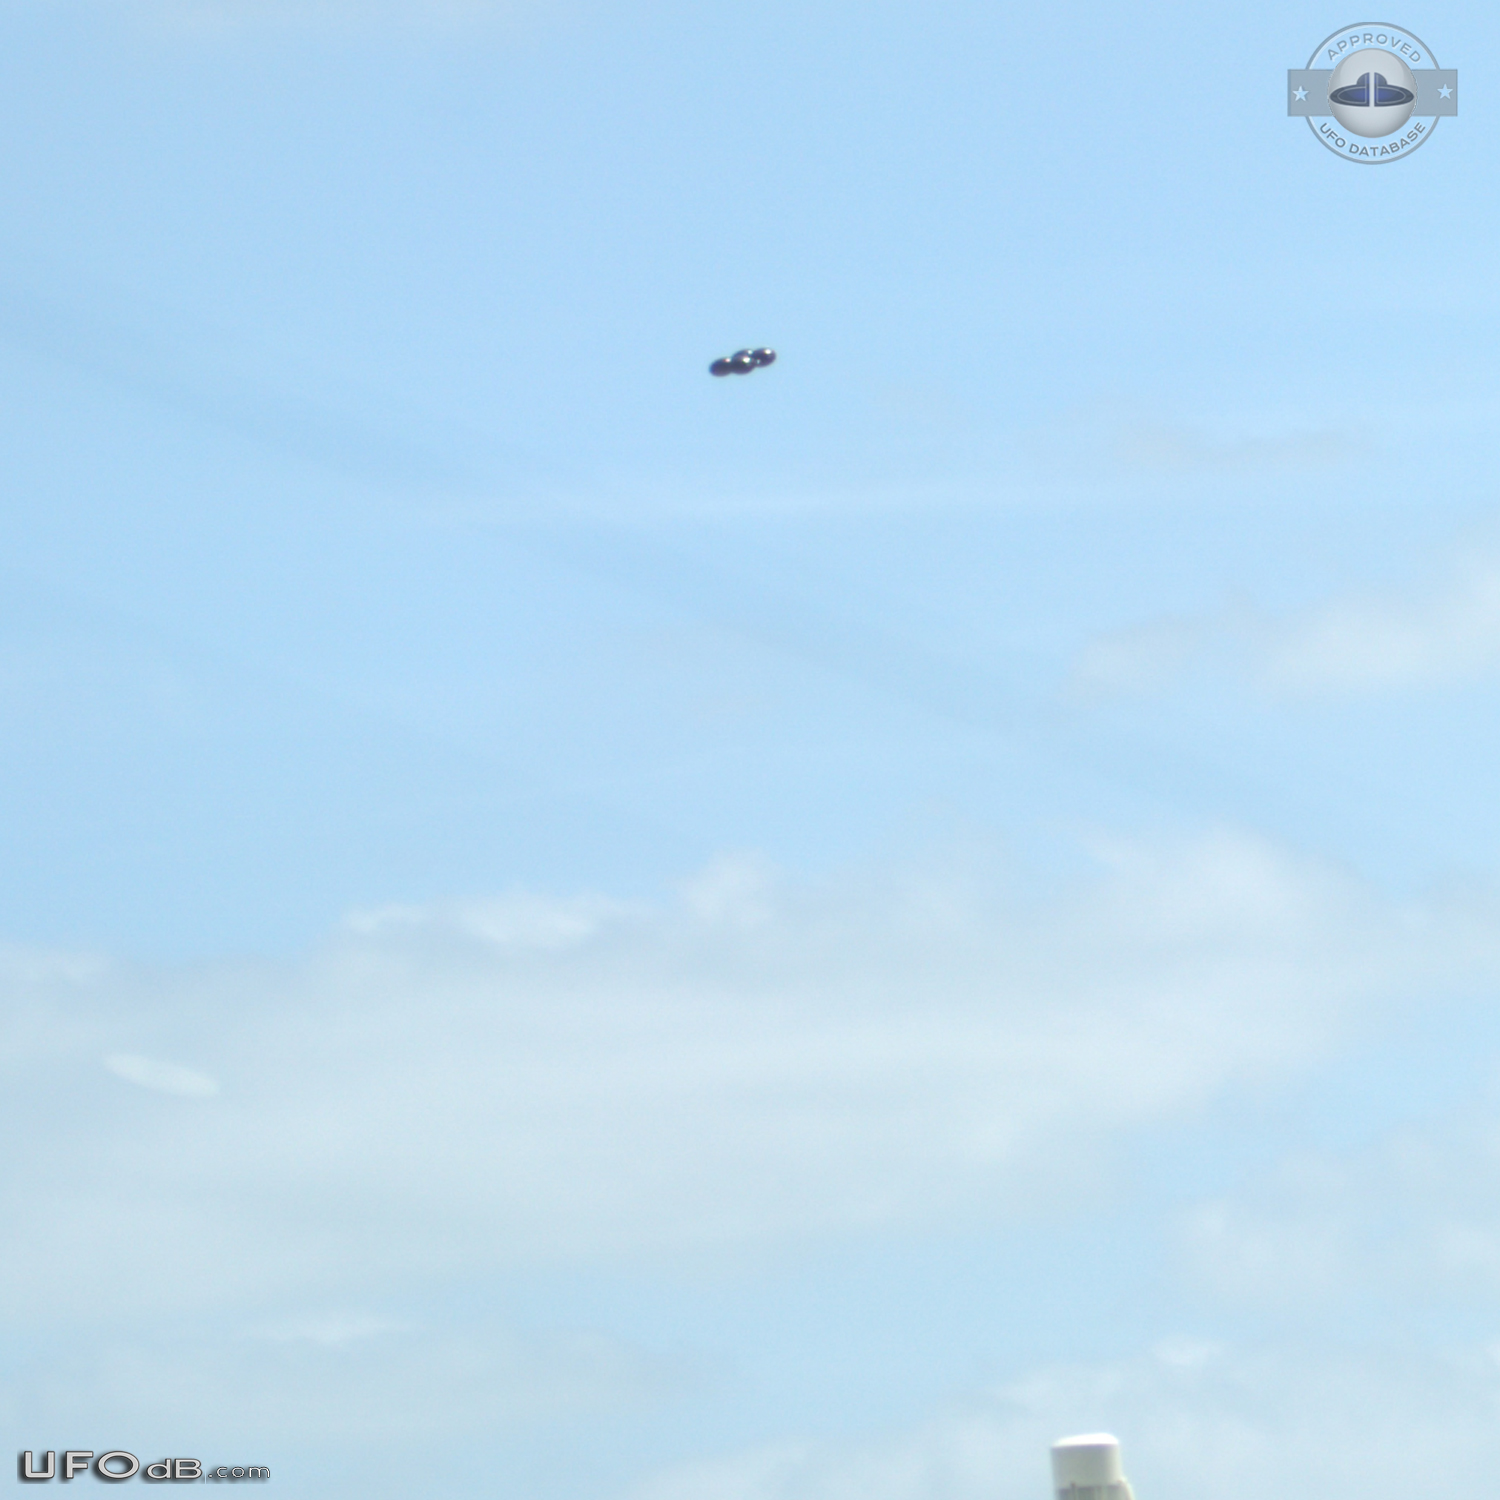 UFO with 4 Spheres over Austin Bergstrom Airport in Texas USA 2014 UFO Picture #670-5